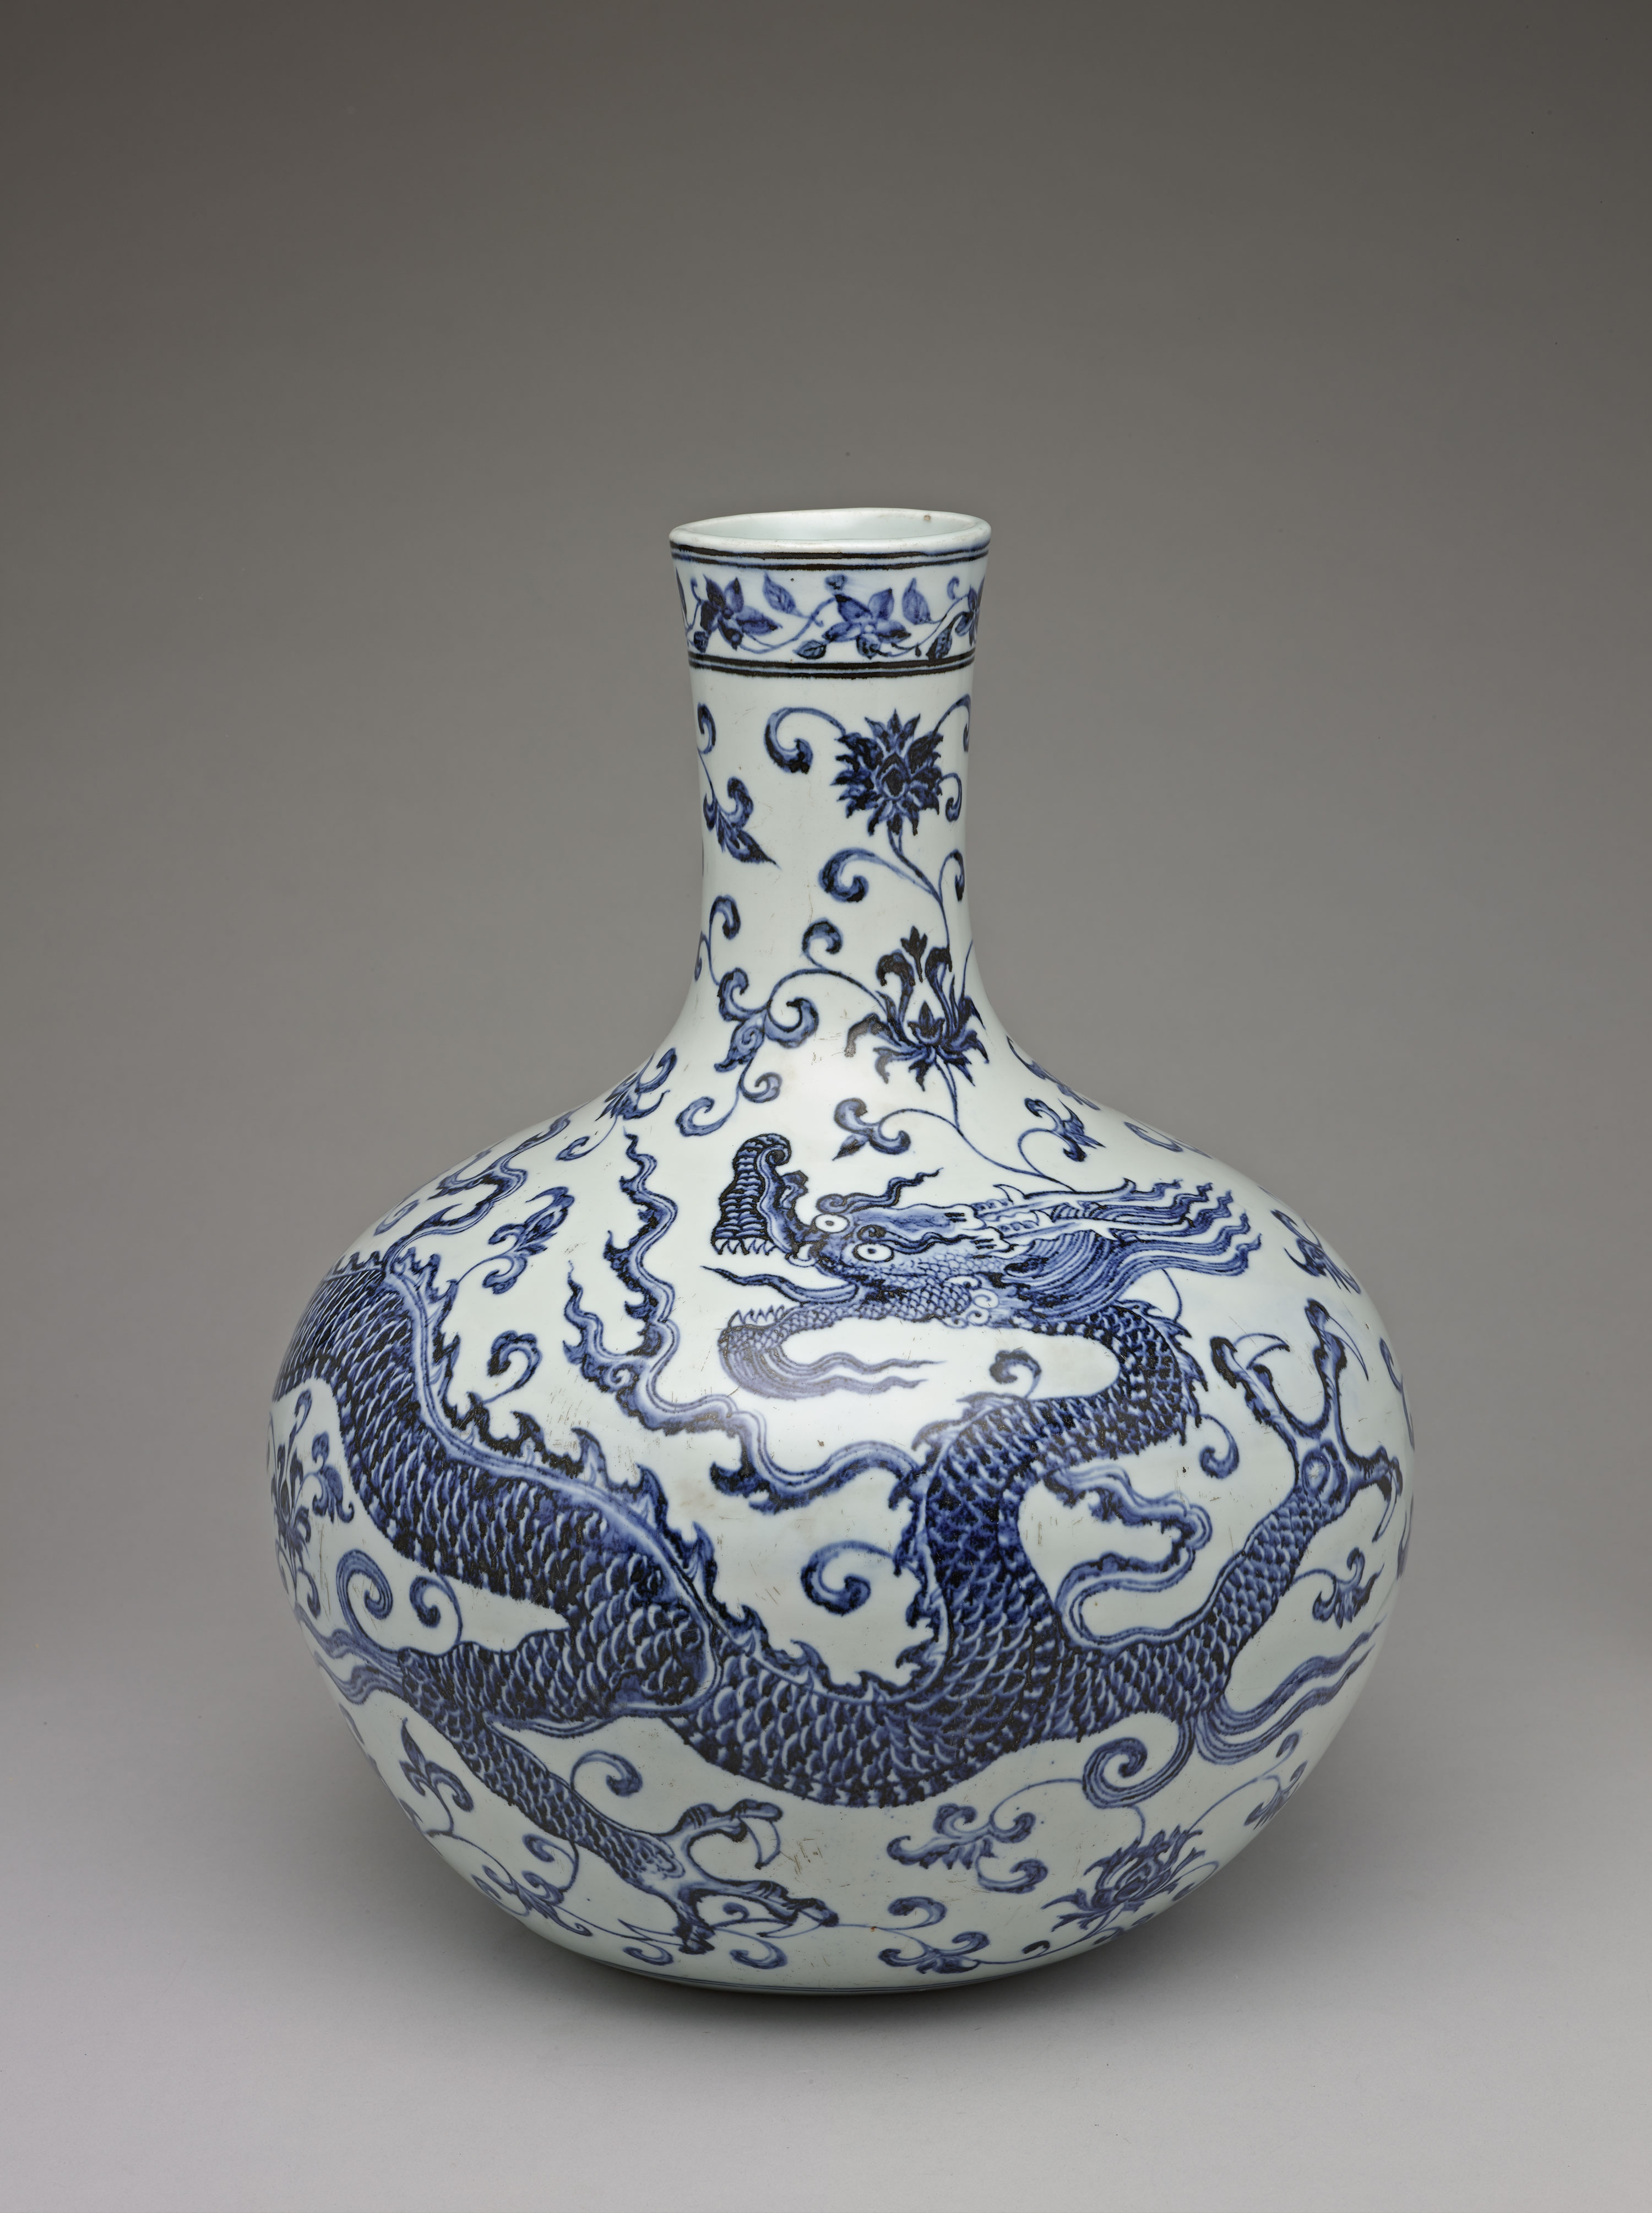 Vase with lotus and dragon patterns in underglaze blue